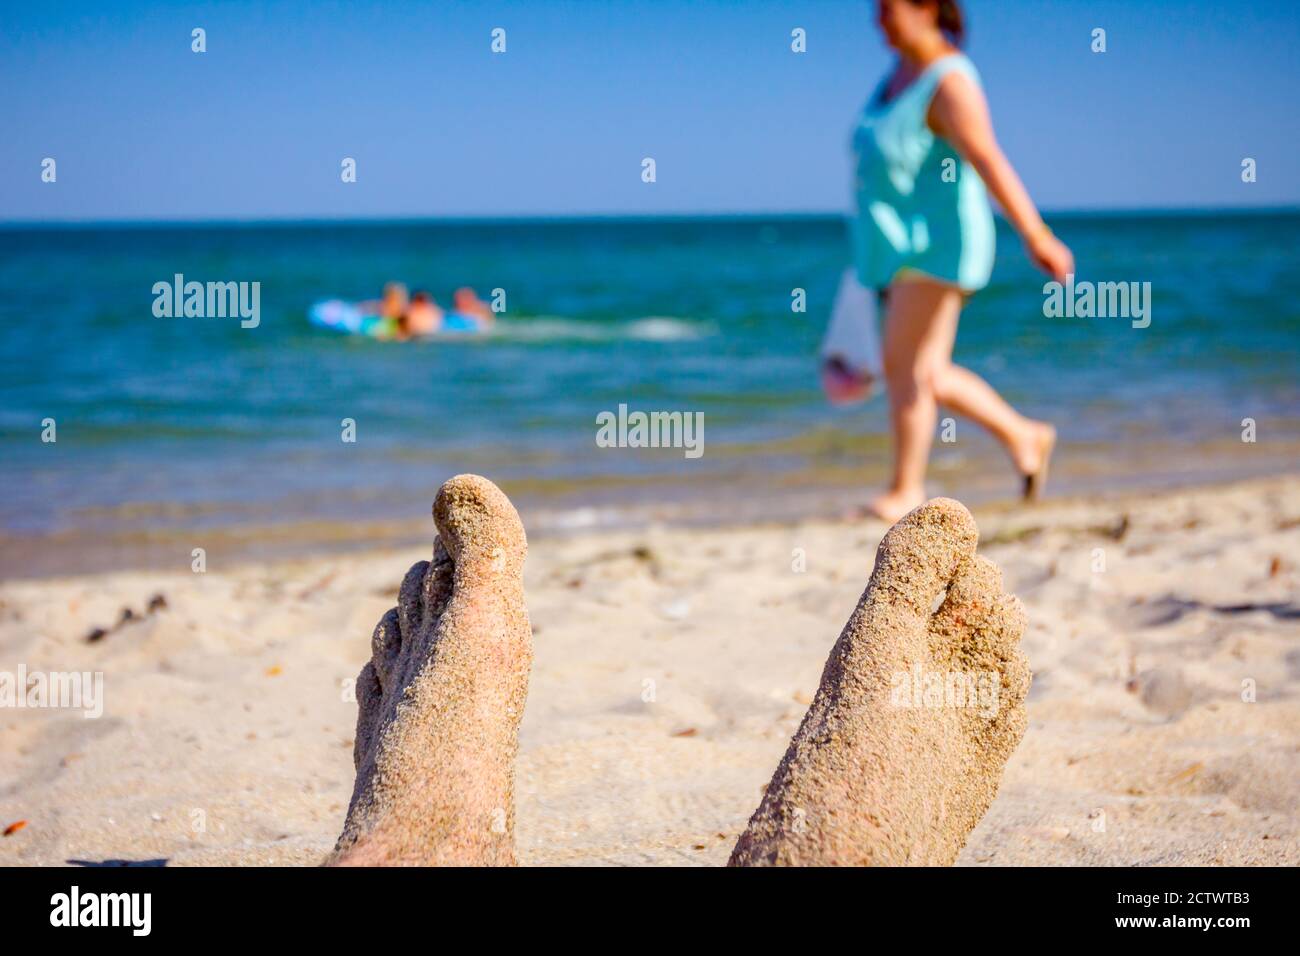 Man's crossed legs are sunbathing by lying carefree on sand next to the coastline, on public beach. Stock Photo